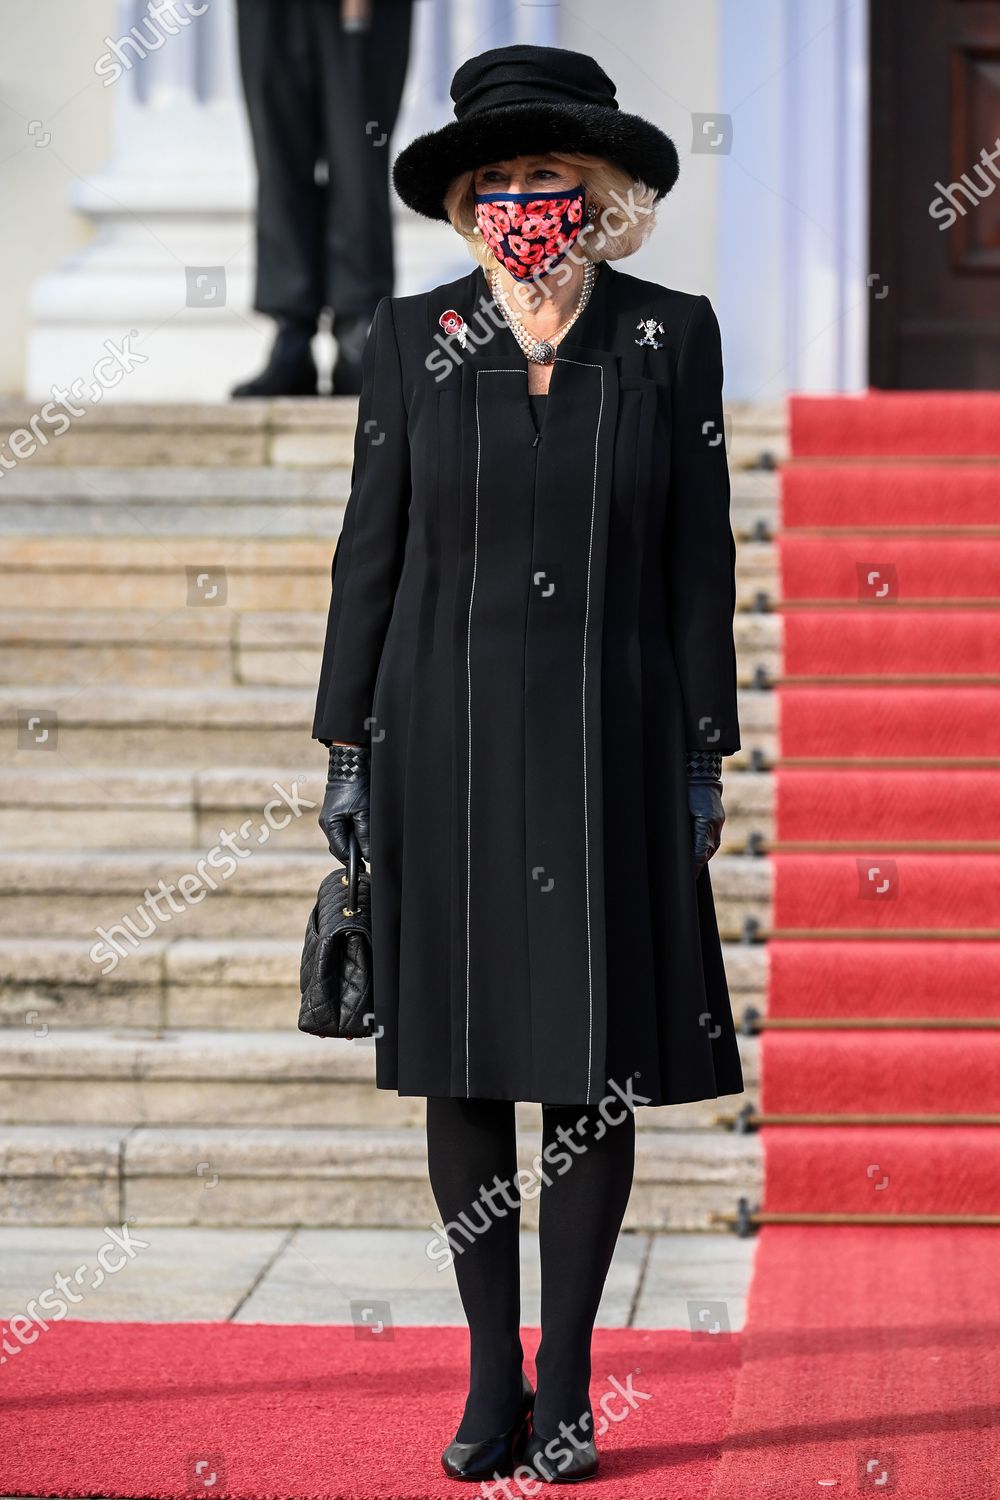 CASA REAL BRITÁNICA - Página 15 Prince-charles-and-camilla-duchess-of-cornwall-visit-to-berlin-germany-shutterstock-editorial-11016282f